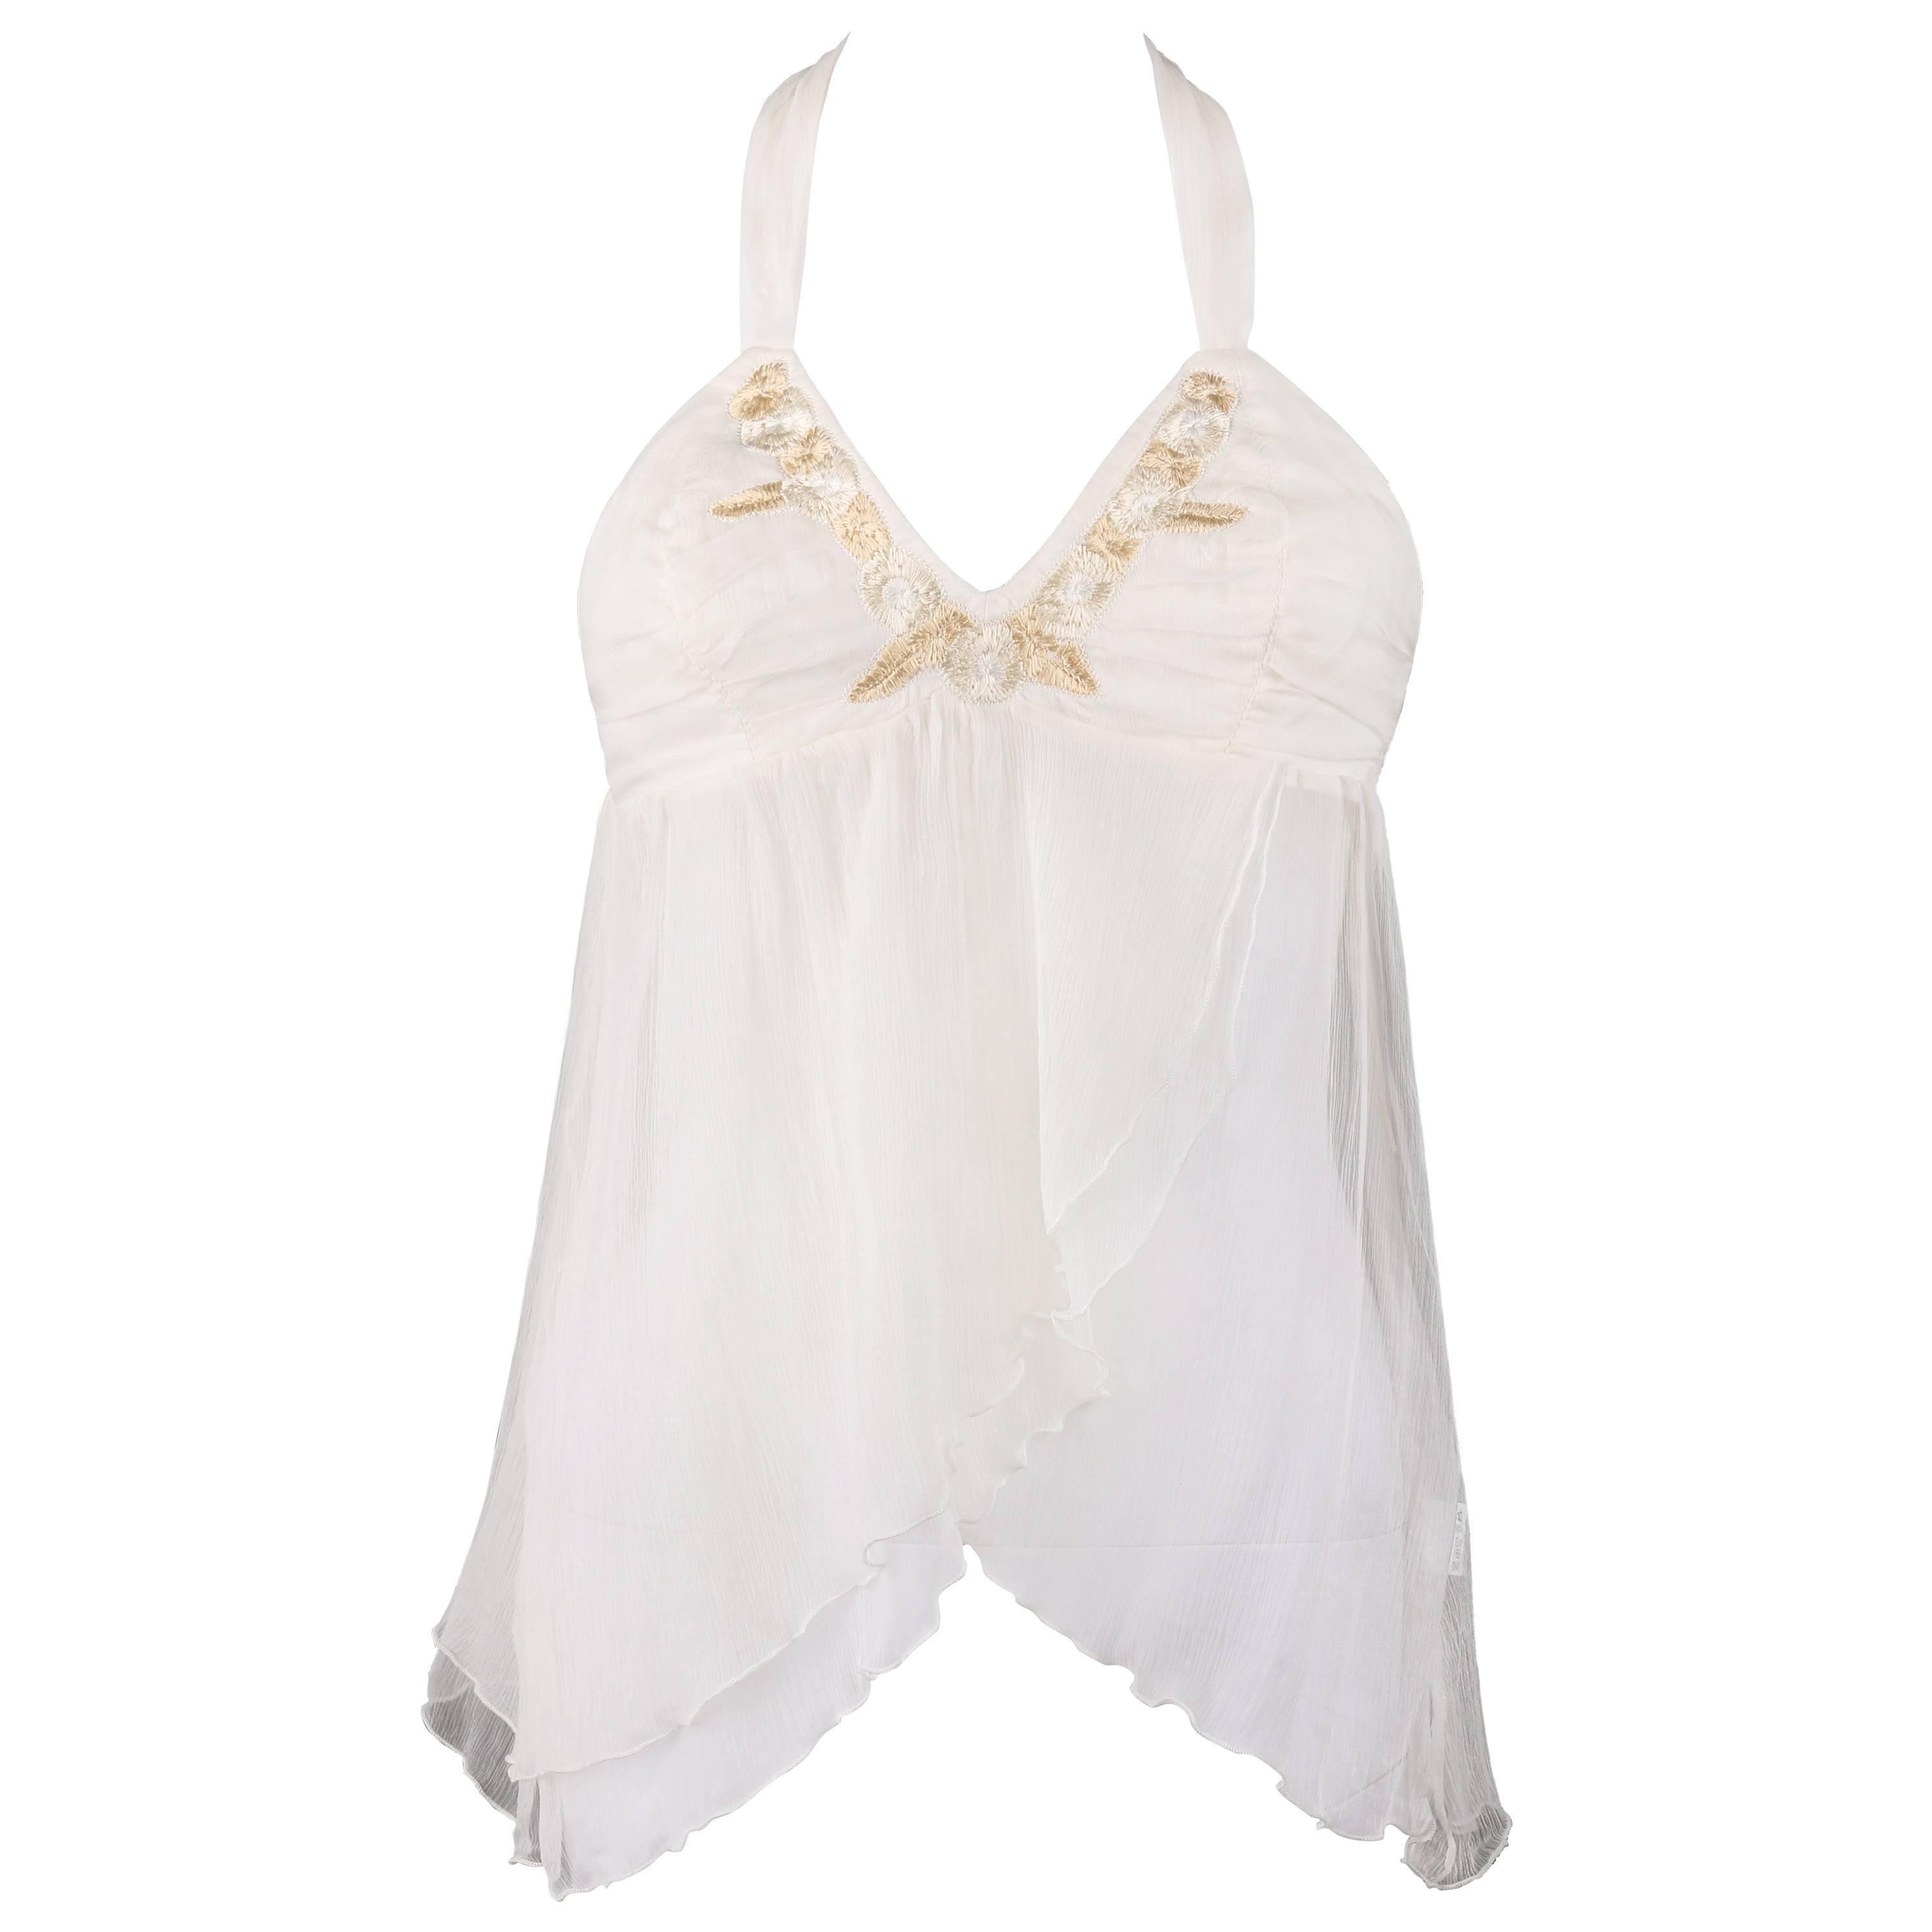 ALEXANDER McQUEEN S/S 1996"The Hunger" White Silk Chiffon Halter Top NWT For Sale